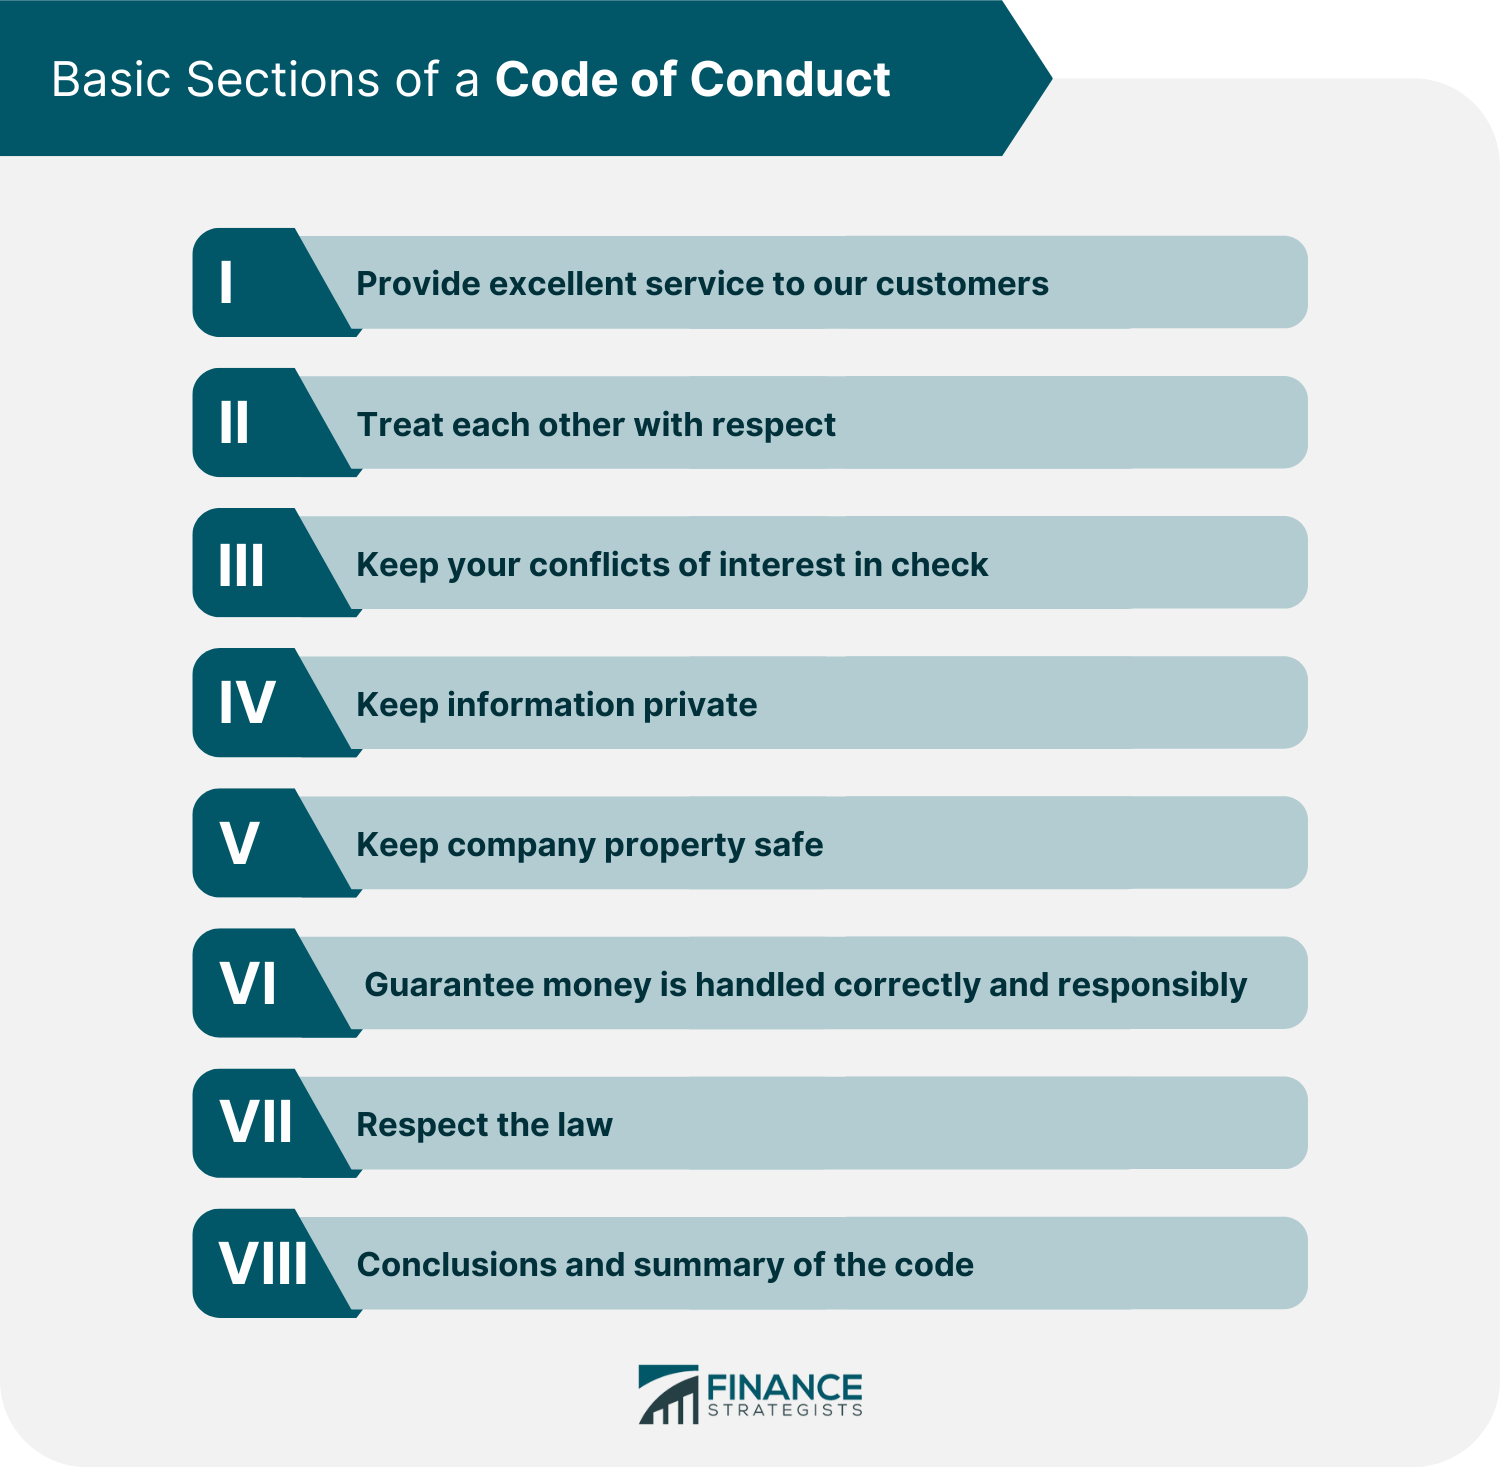 Basic Sections of a Code of Conduct